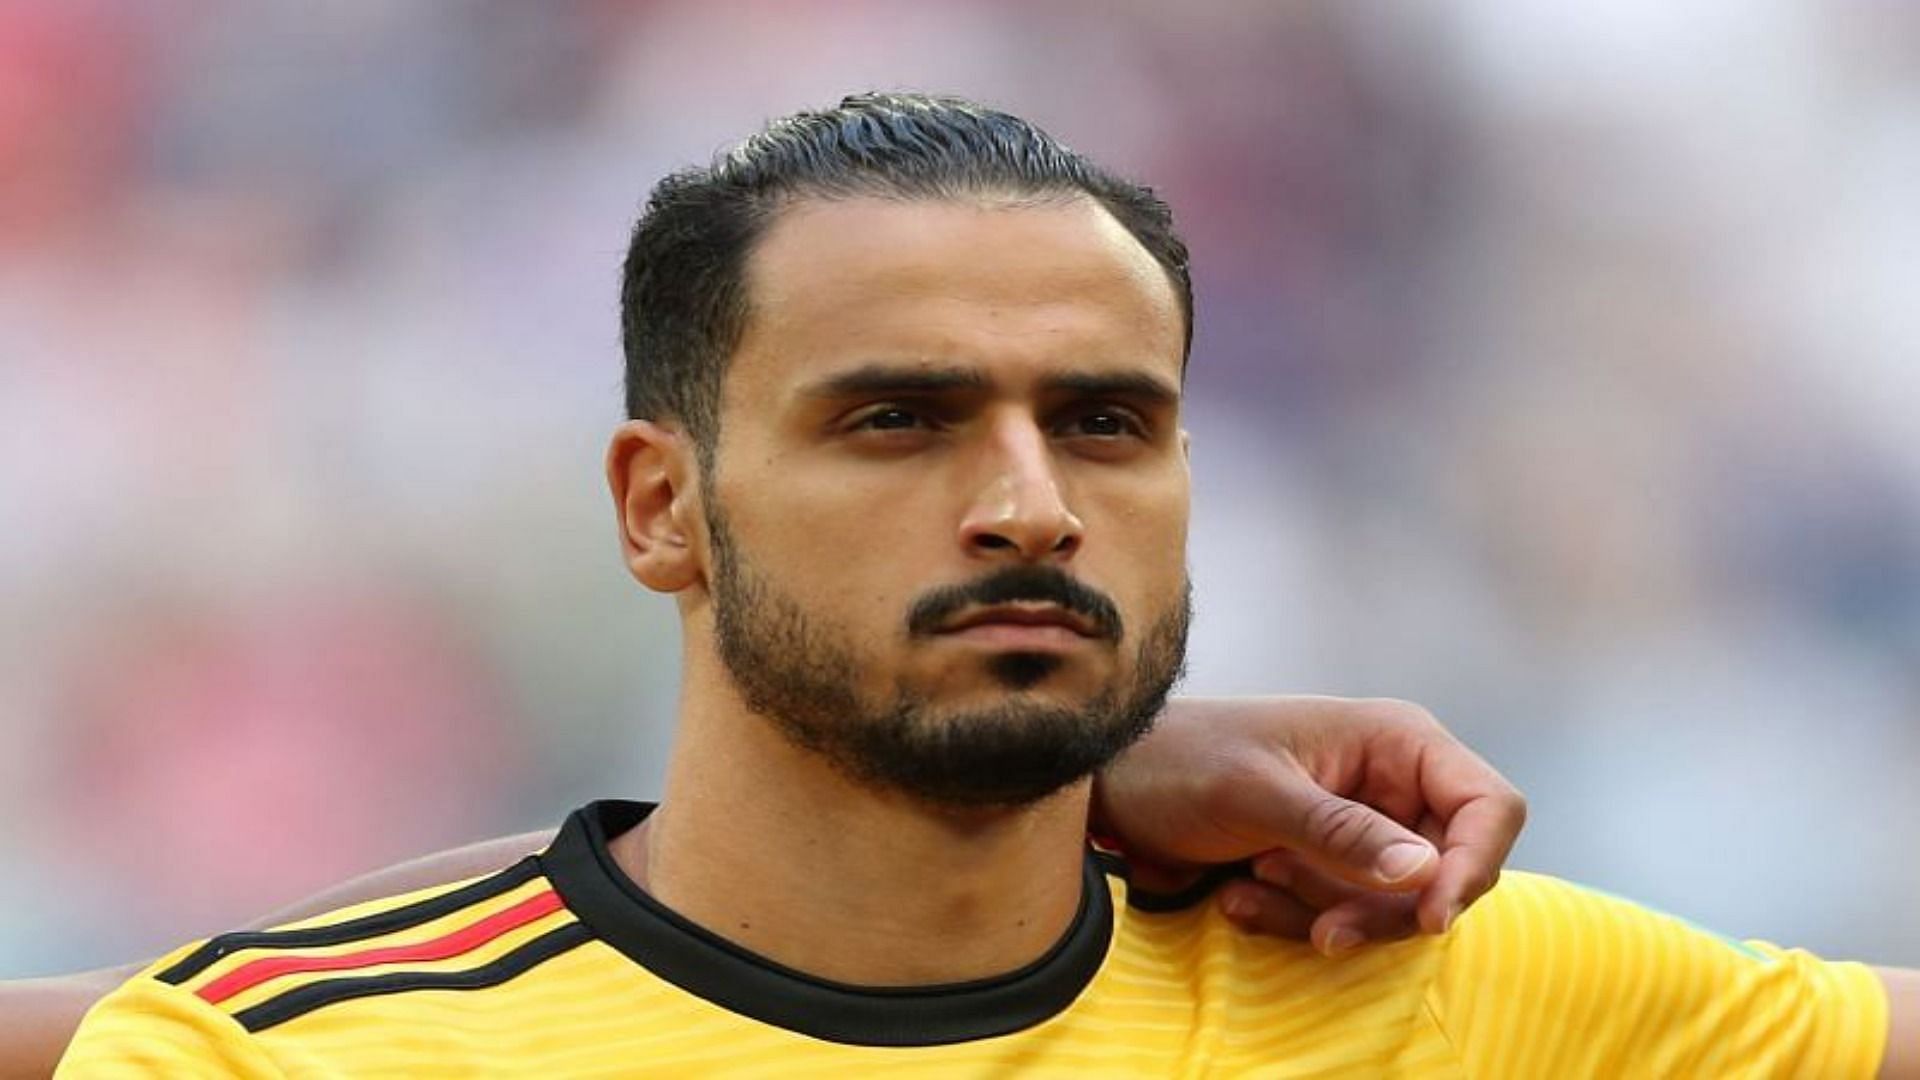 Chadli&#039;s dual citizenship enabled him to represent both Belgium and Morocco.